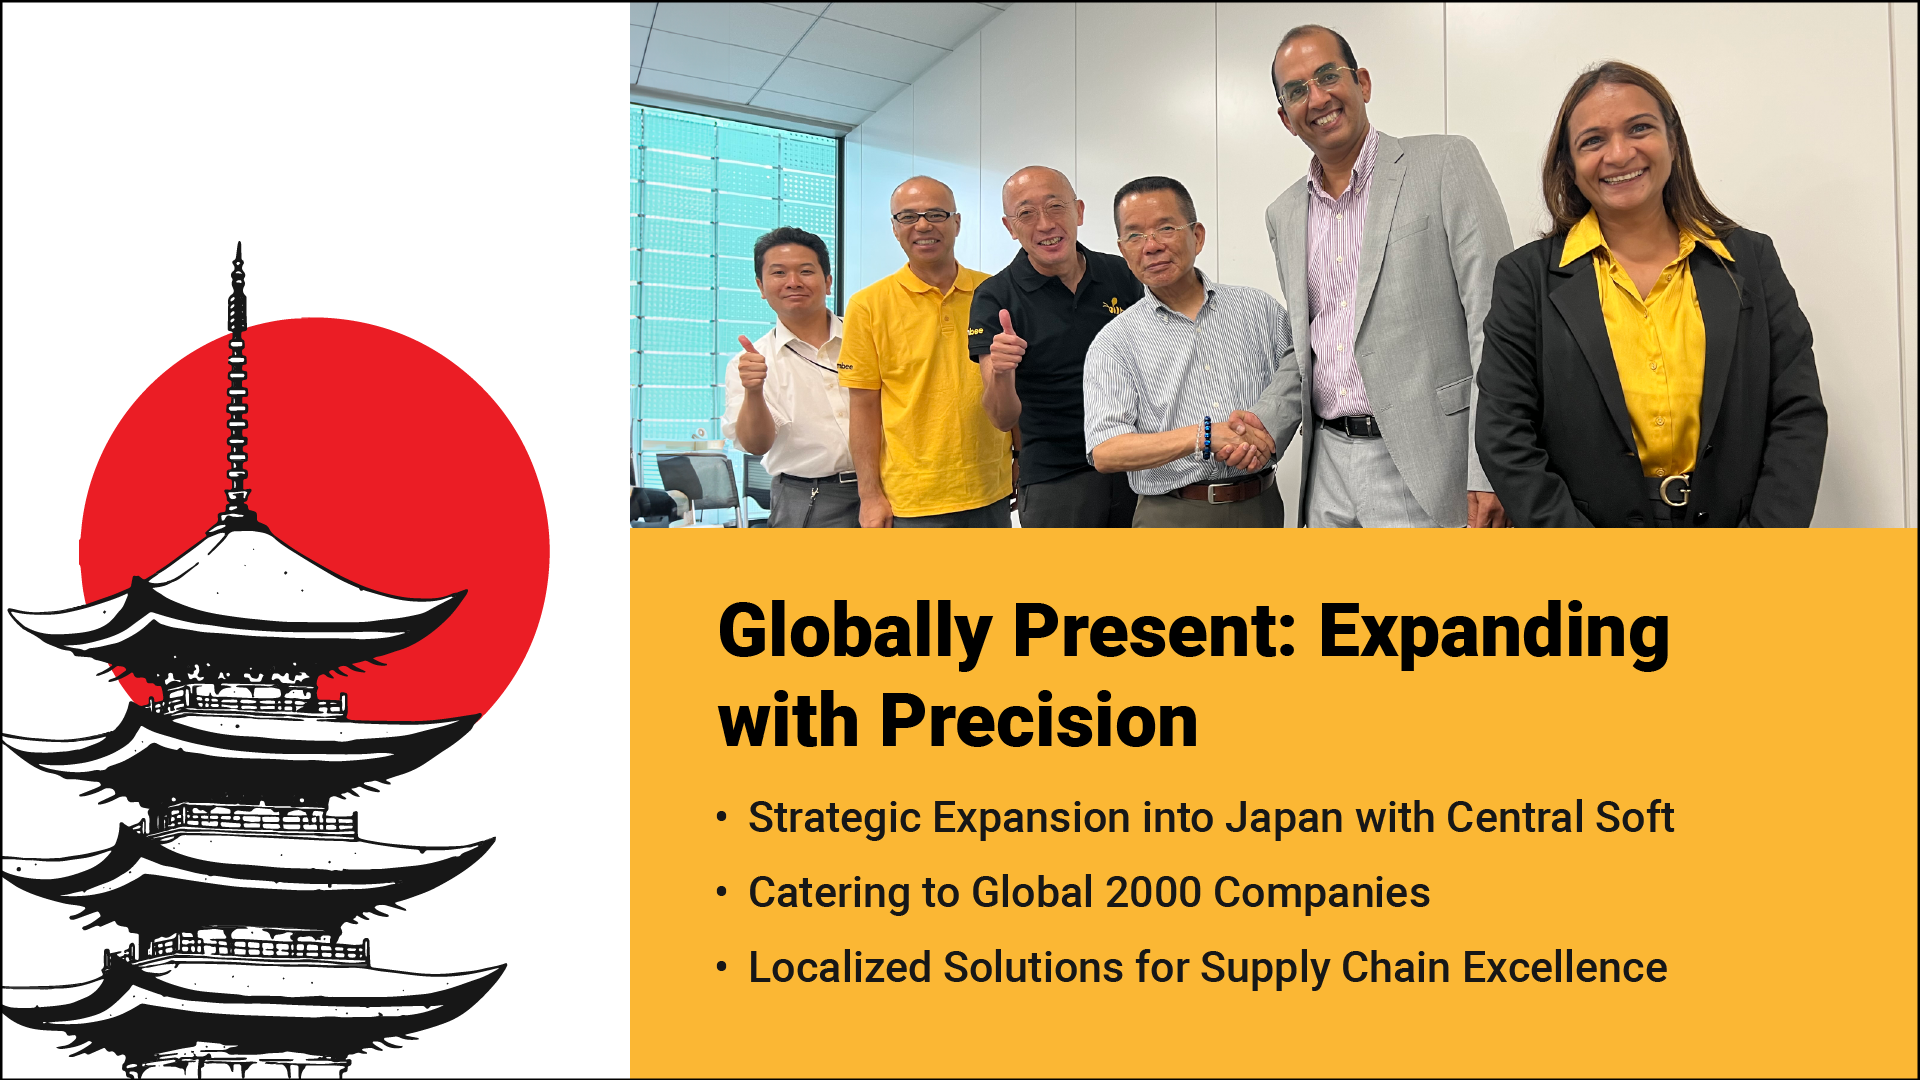 Globally Present: Expanding with Precision